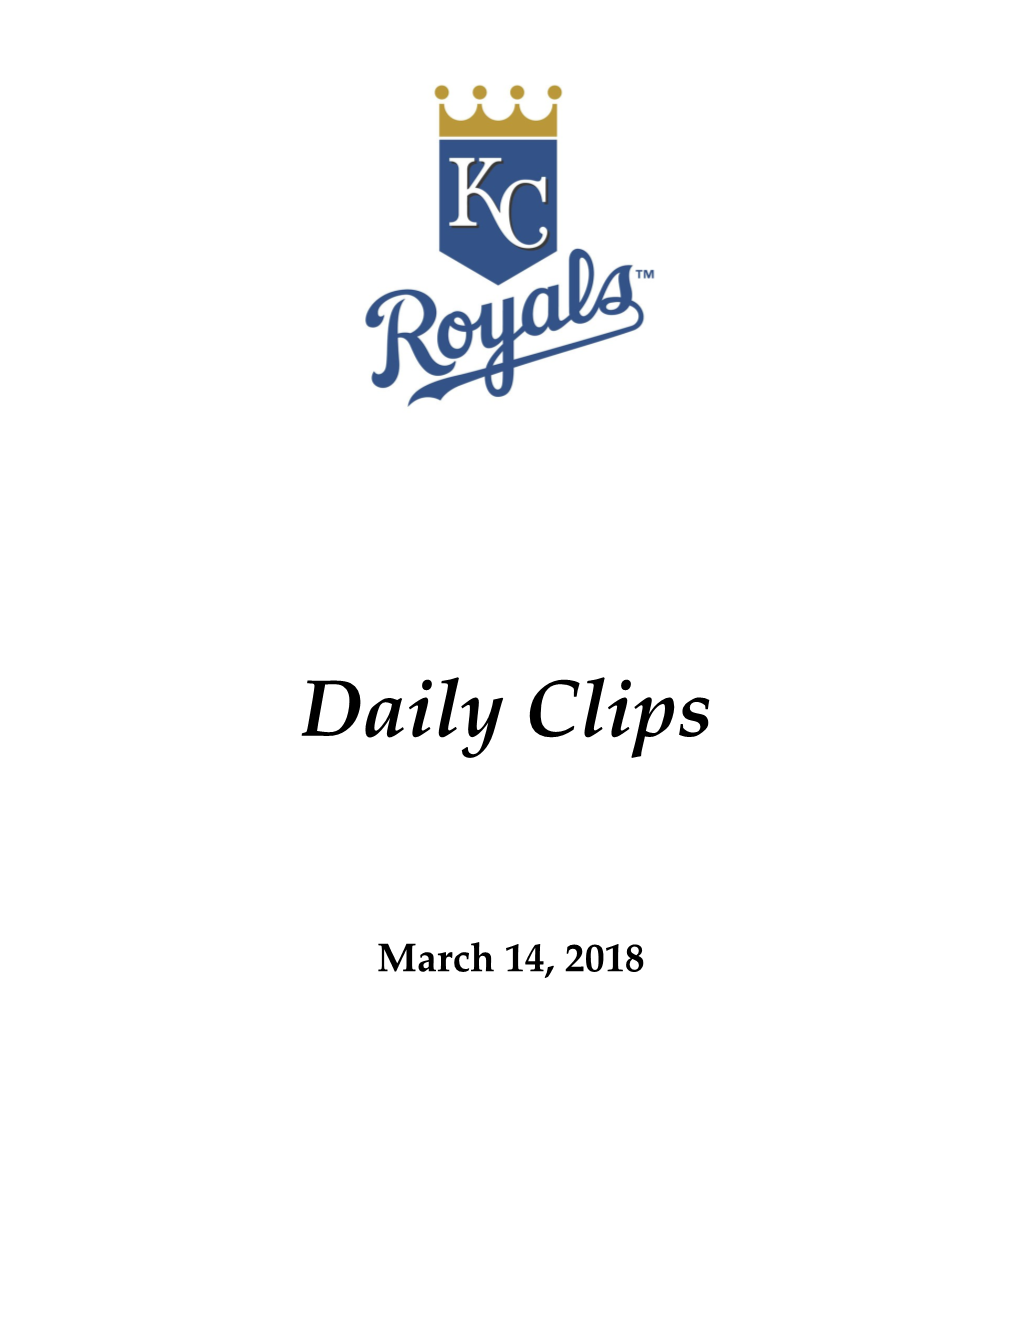 Royals View Dozier As Future First Baseman